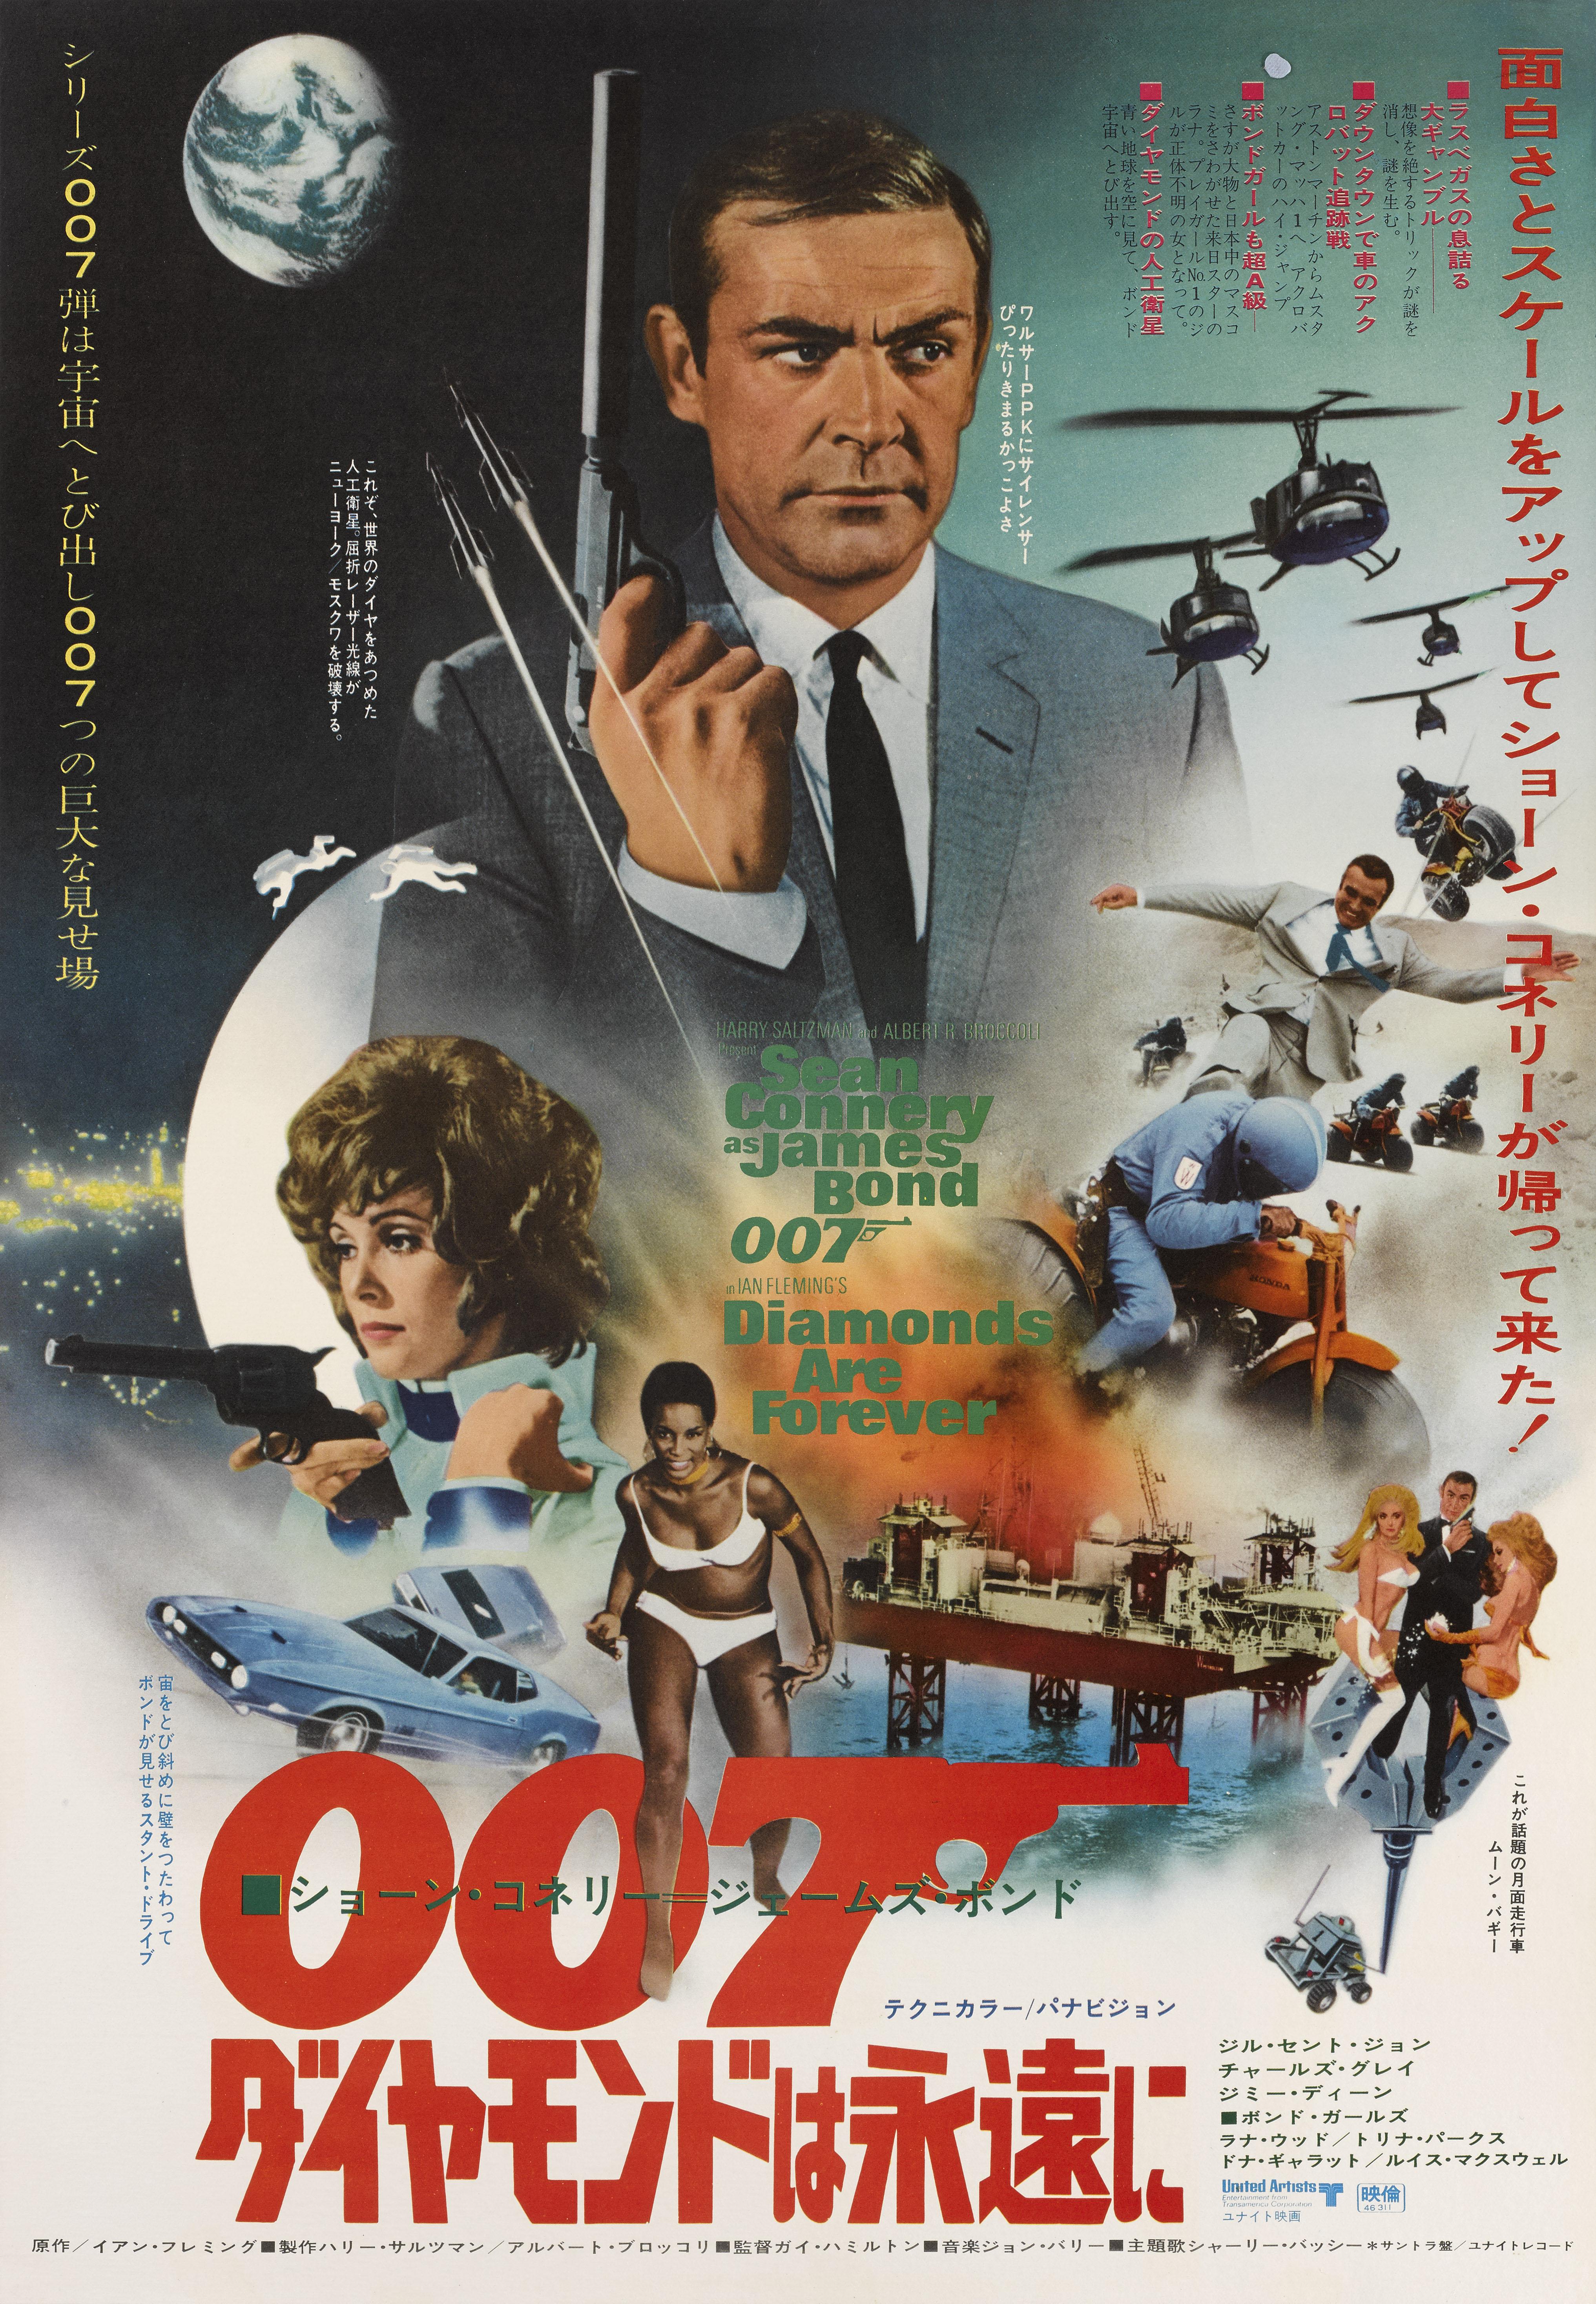 Original Japanese film poster for Diamonds are Forever the seventh film in the series and the sixth time Sean Connery would play James Bond 007. The film was directed by Guy Hamilton. The artwork on this poster is unique to the films Japanese